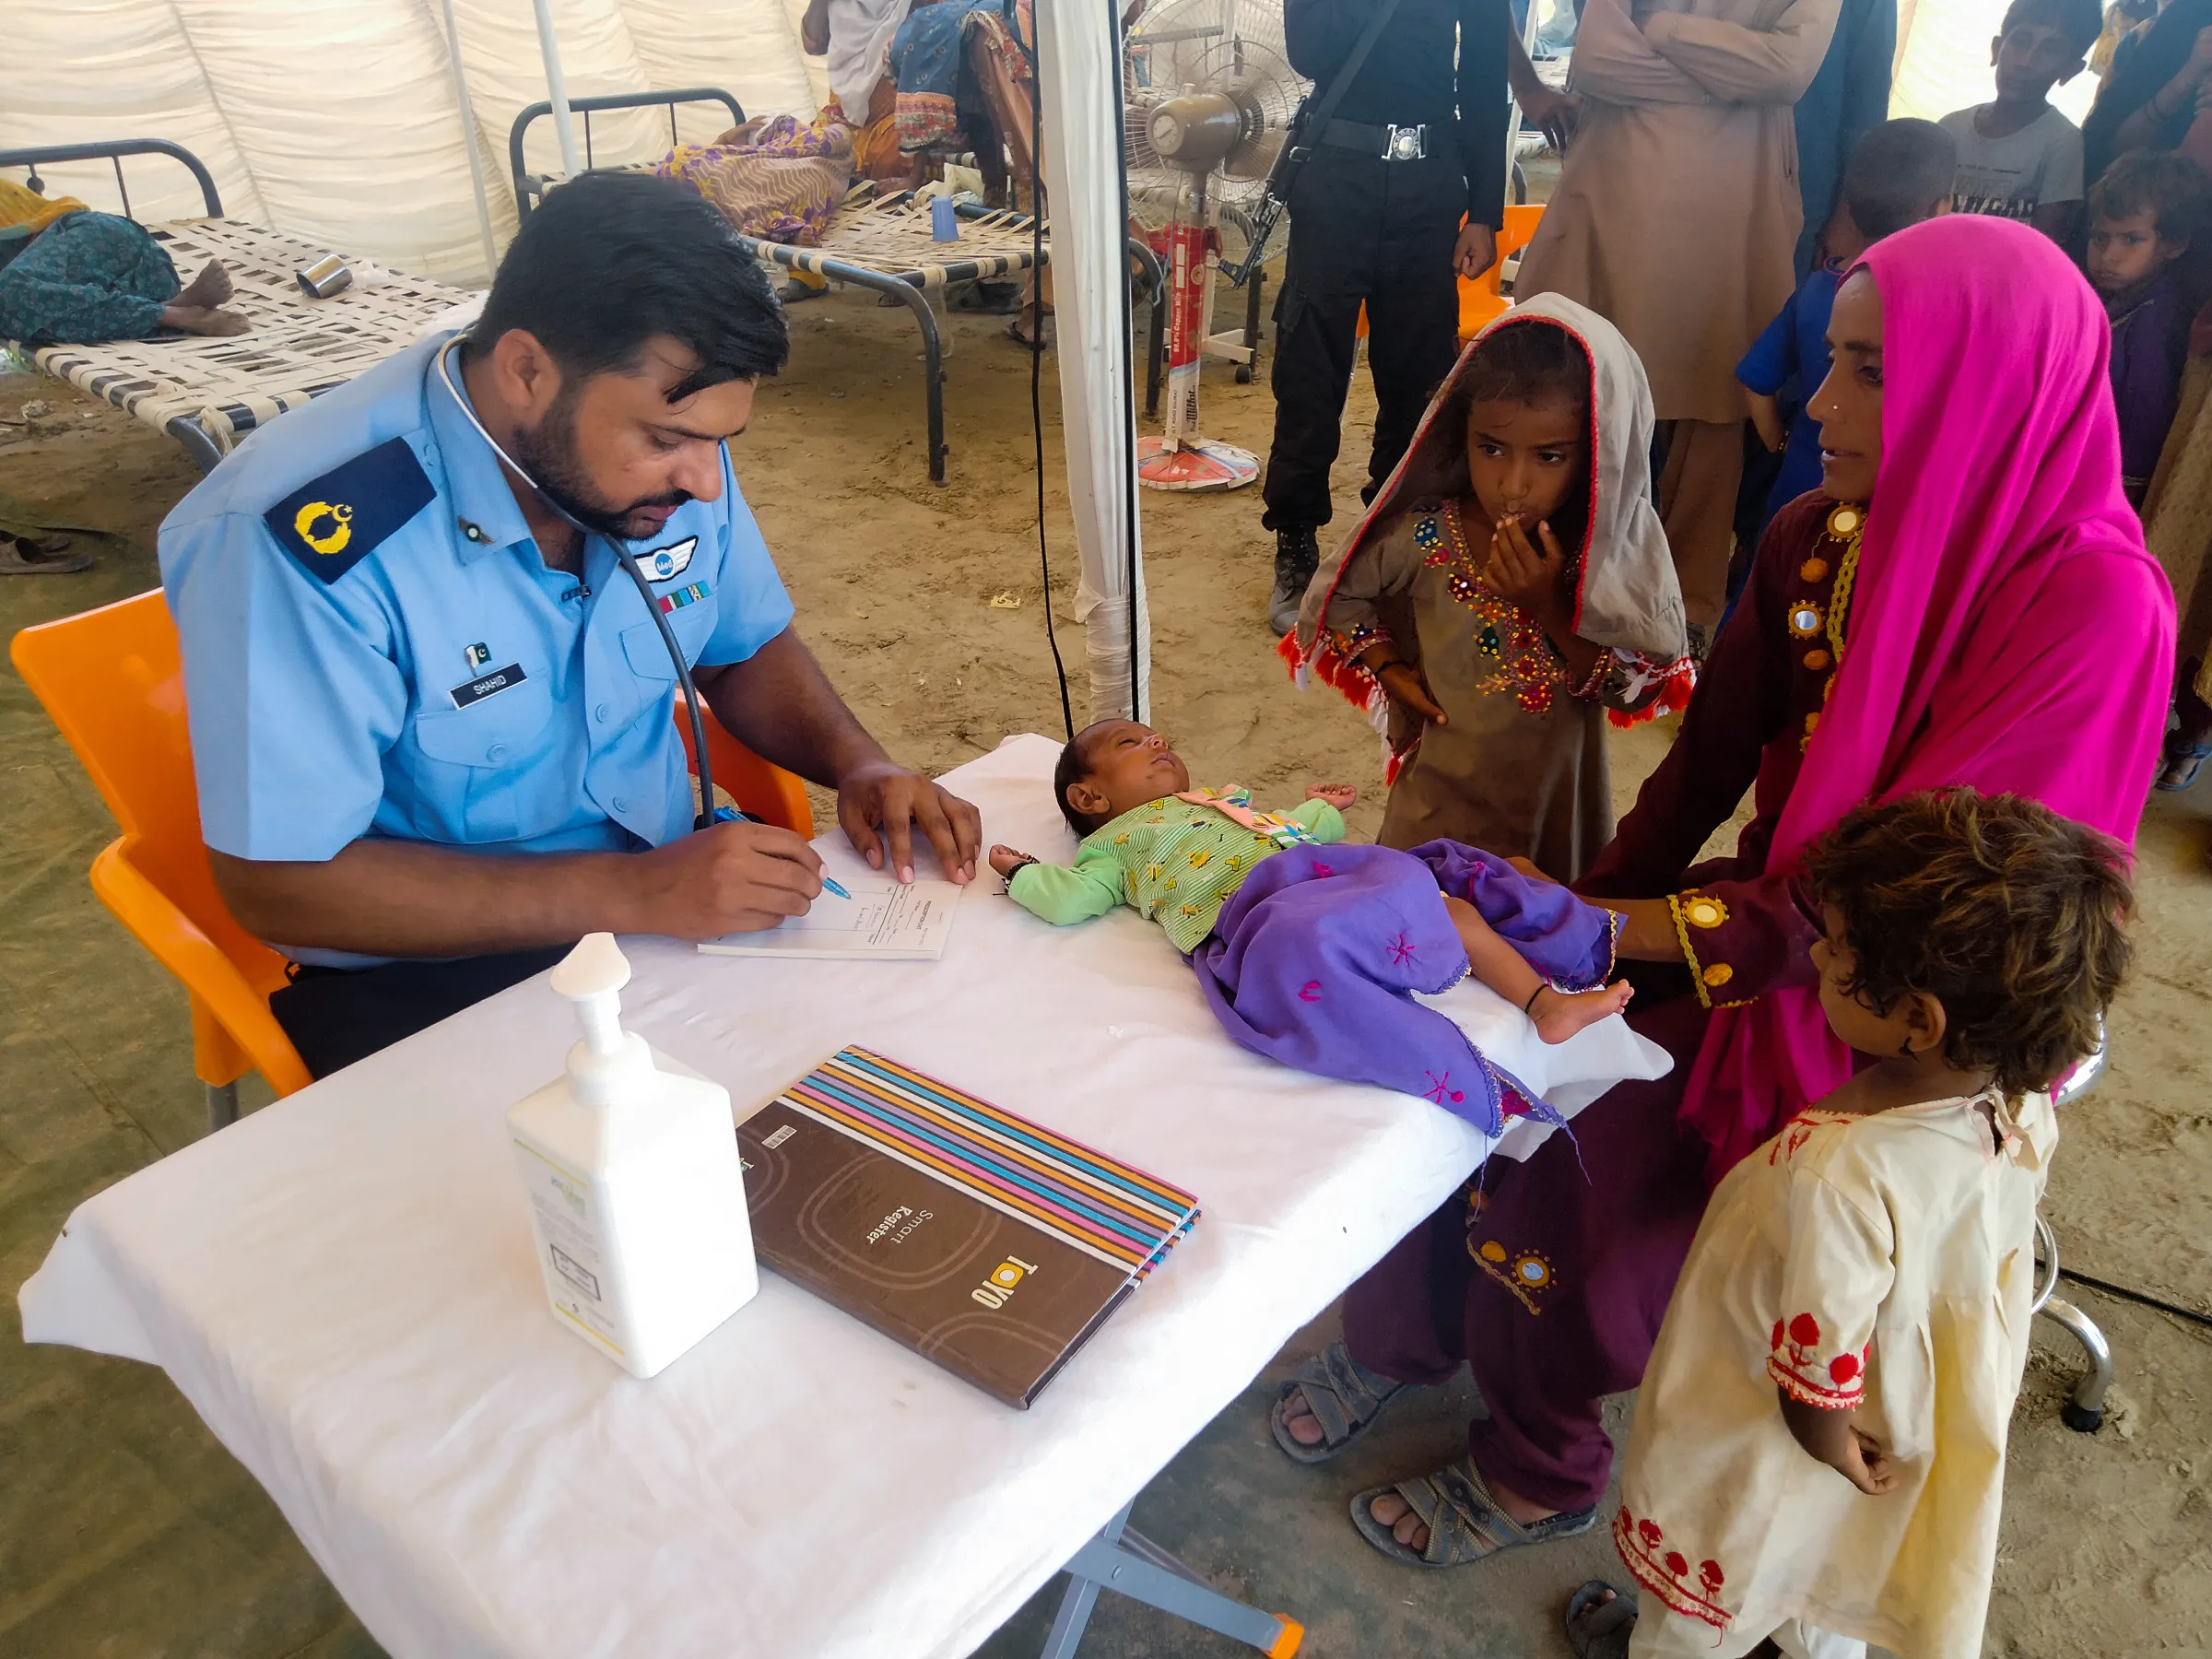 A woman, who is a flood victim, receives medical assistance for her baby as she takes refuge at a relief camp, following rains and floods during the monsoon season in Sehwan, Pakistan September 9, 2022